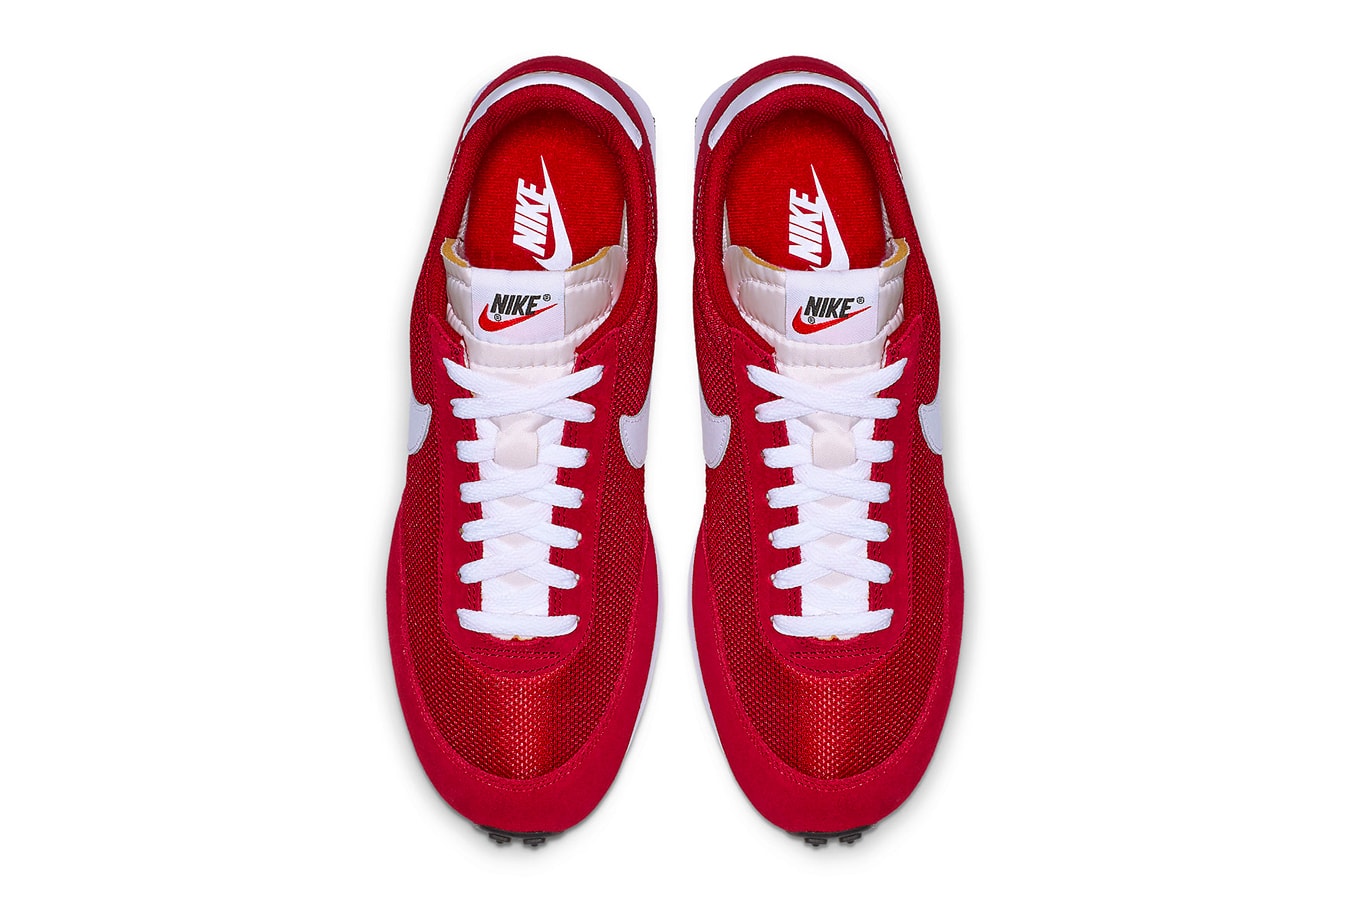 Nike Air Tailwind 79 “Gym Red” re-Release Date february 2019